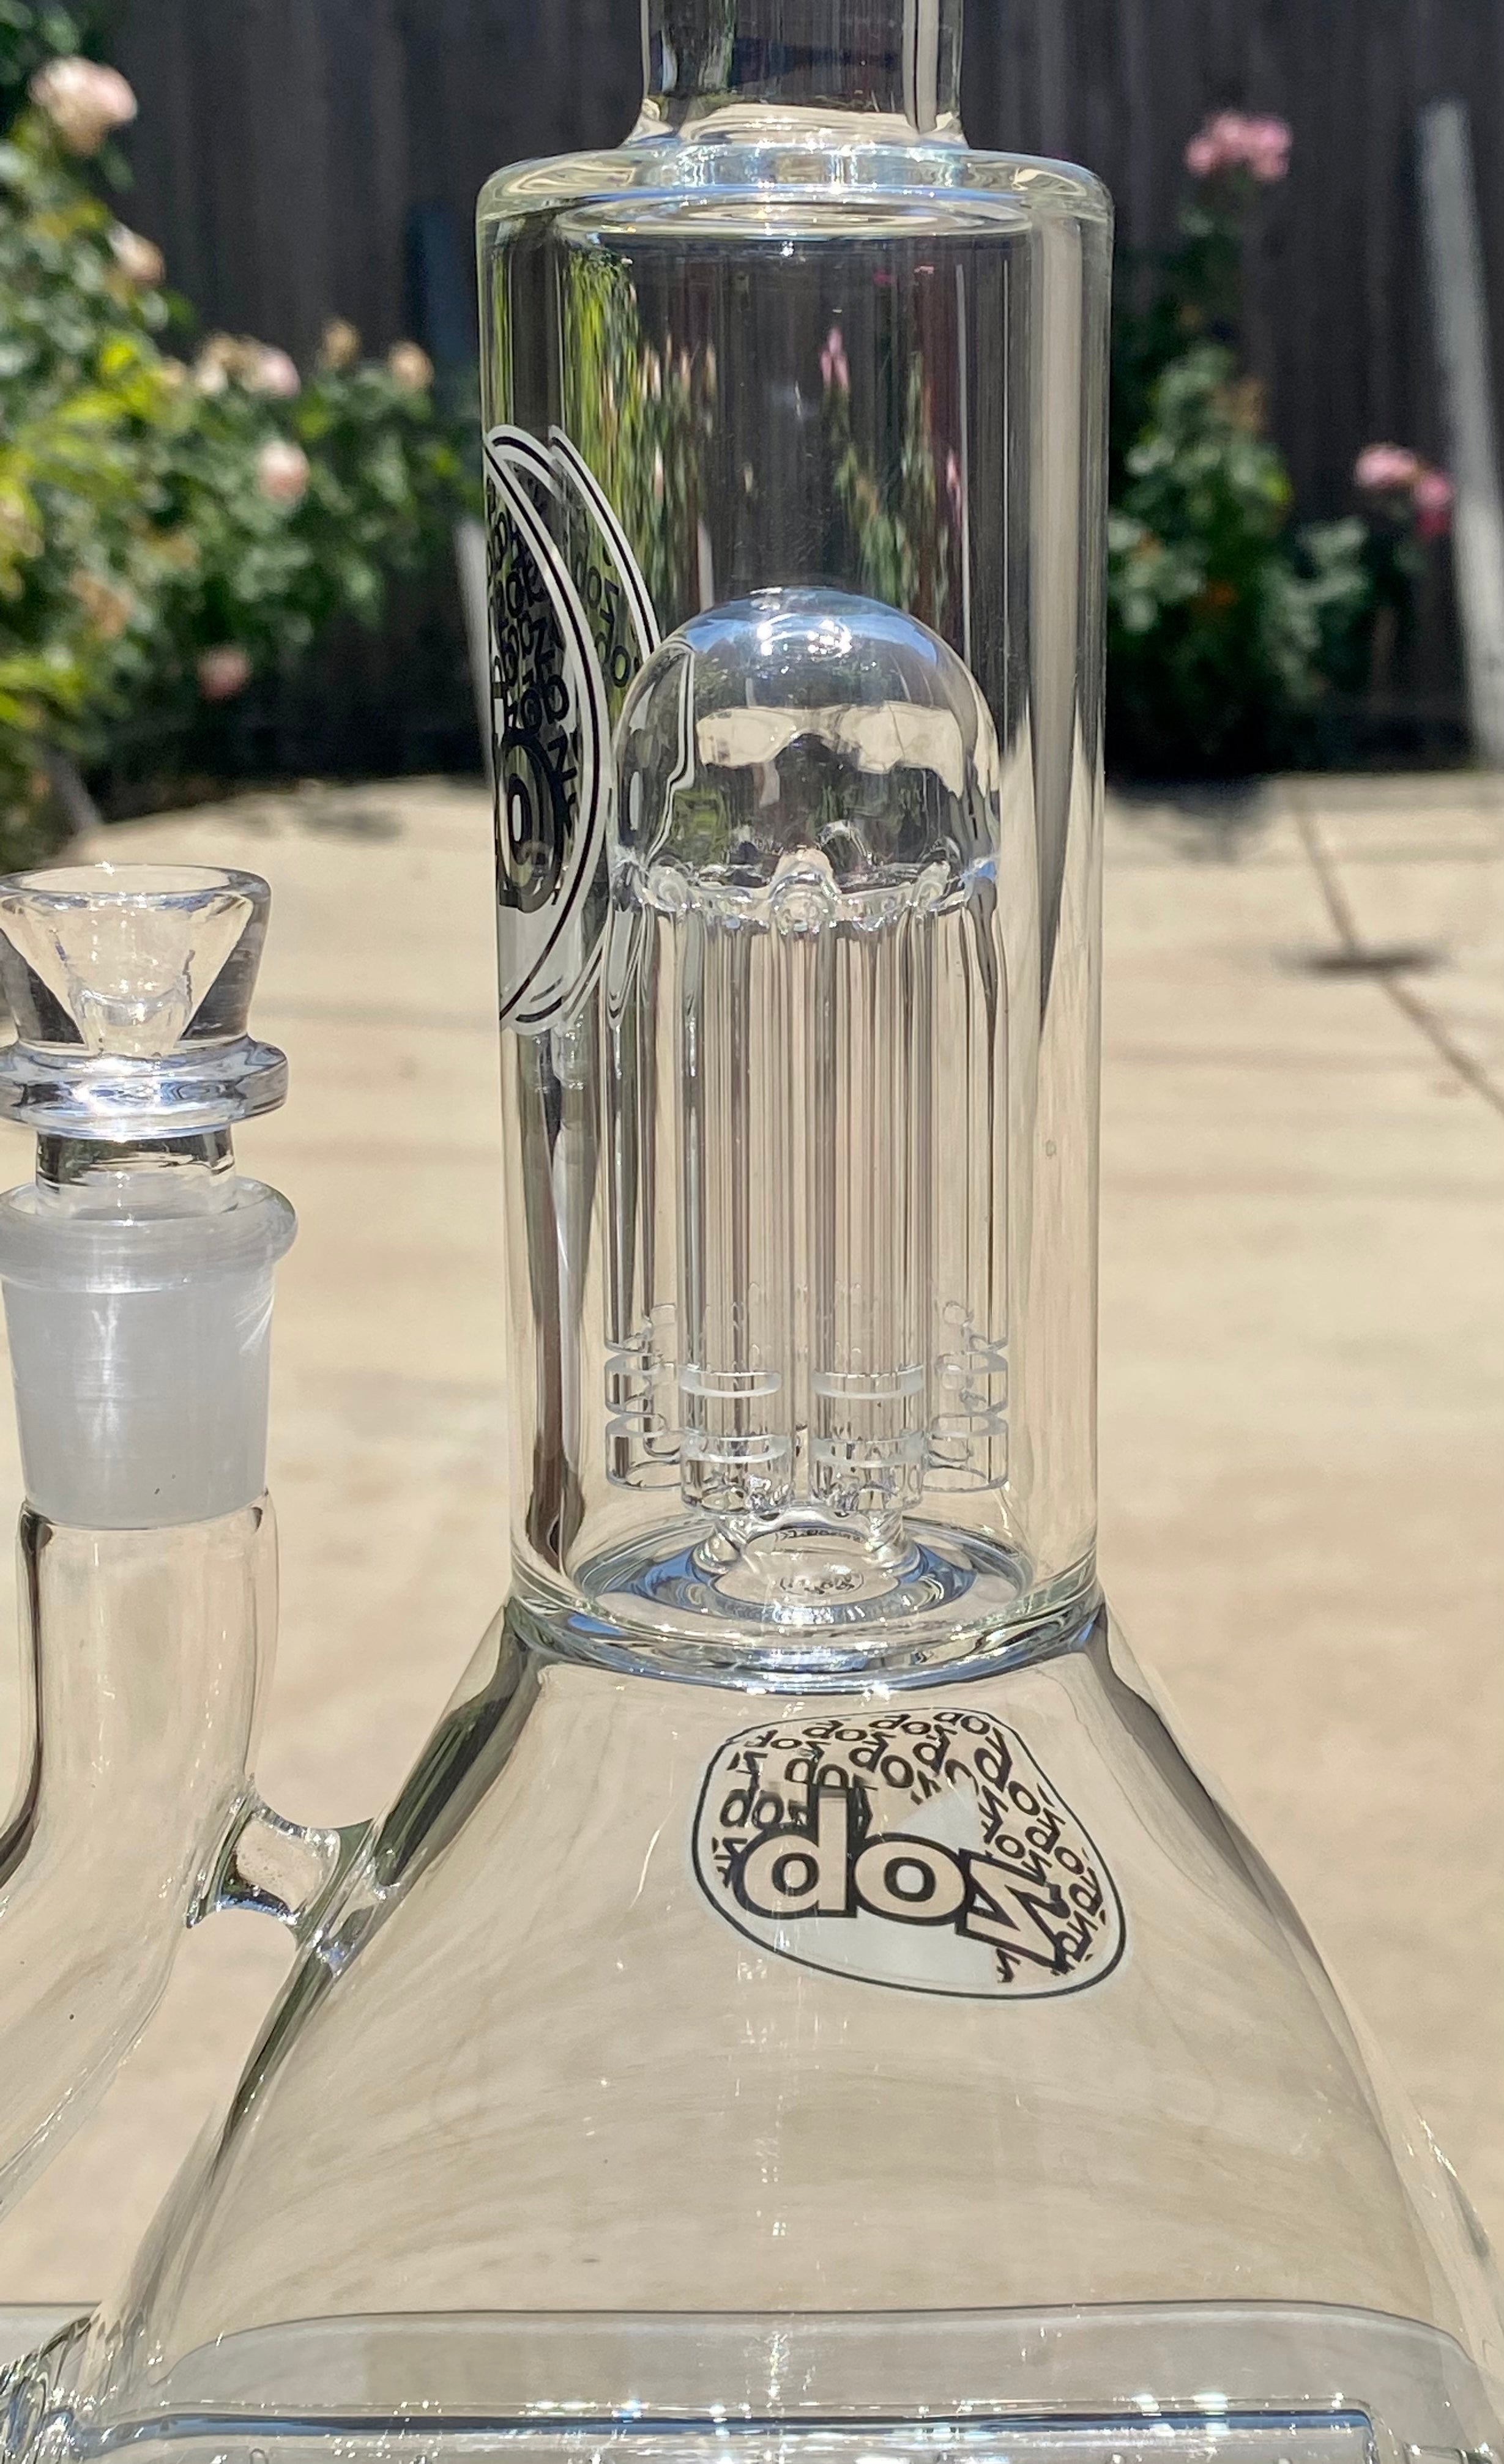 Zob 16 inch Stemless Inline Diffused Beaker Wubbler with 8 Arm Tree Percolator Black & White Label